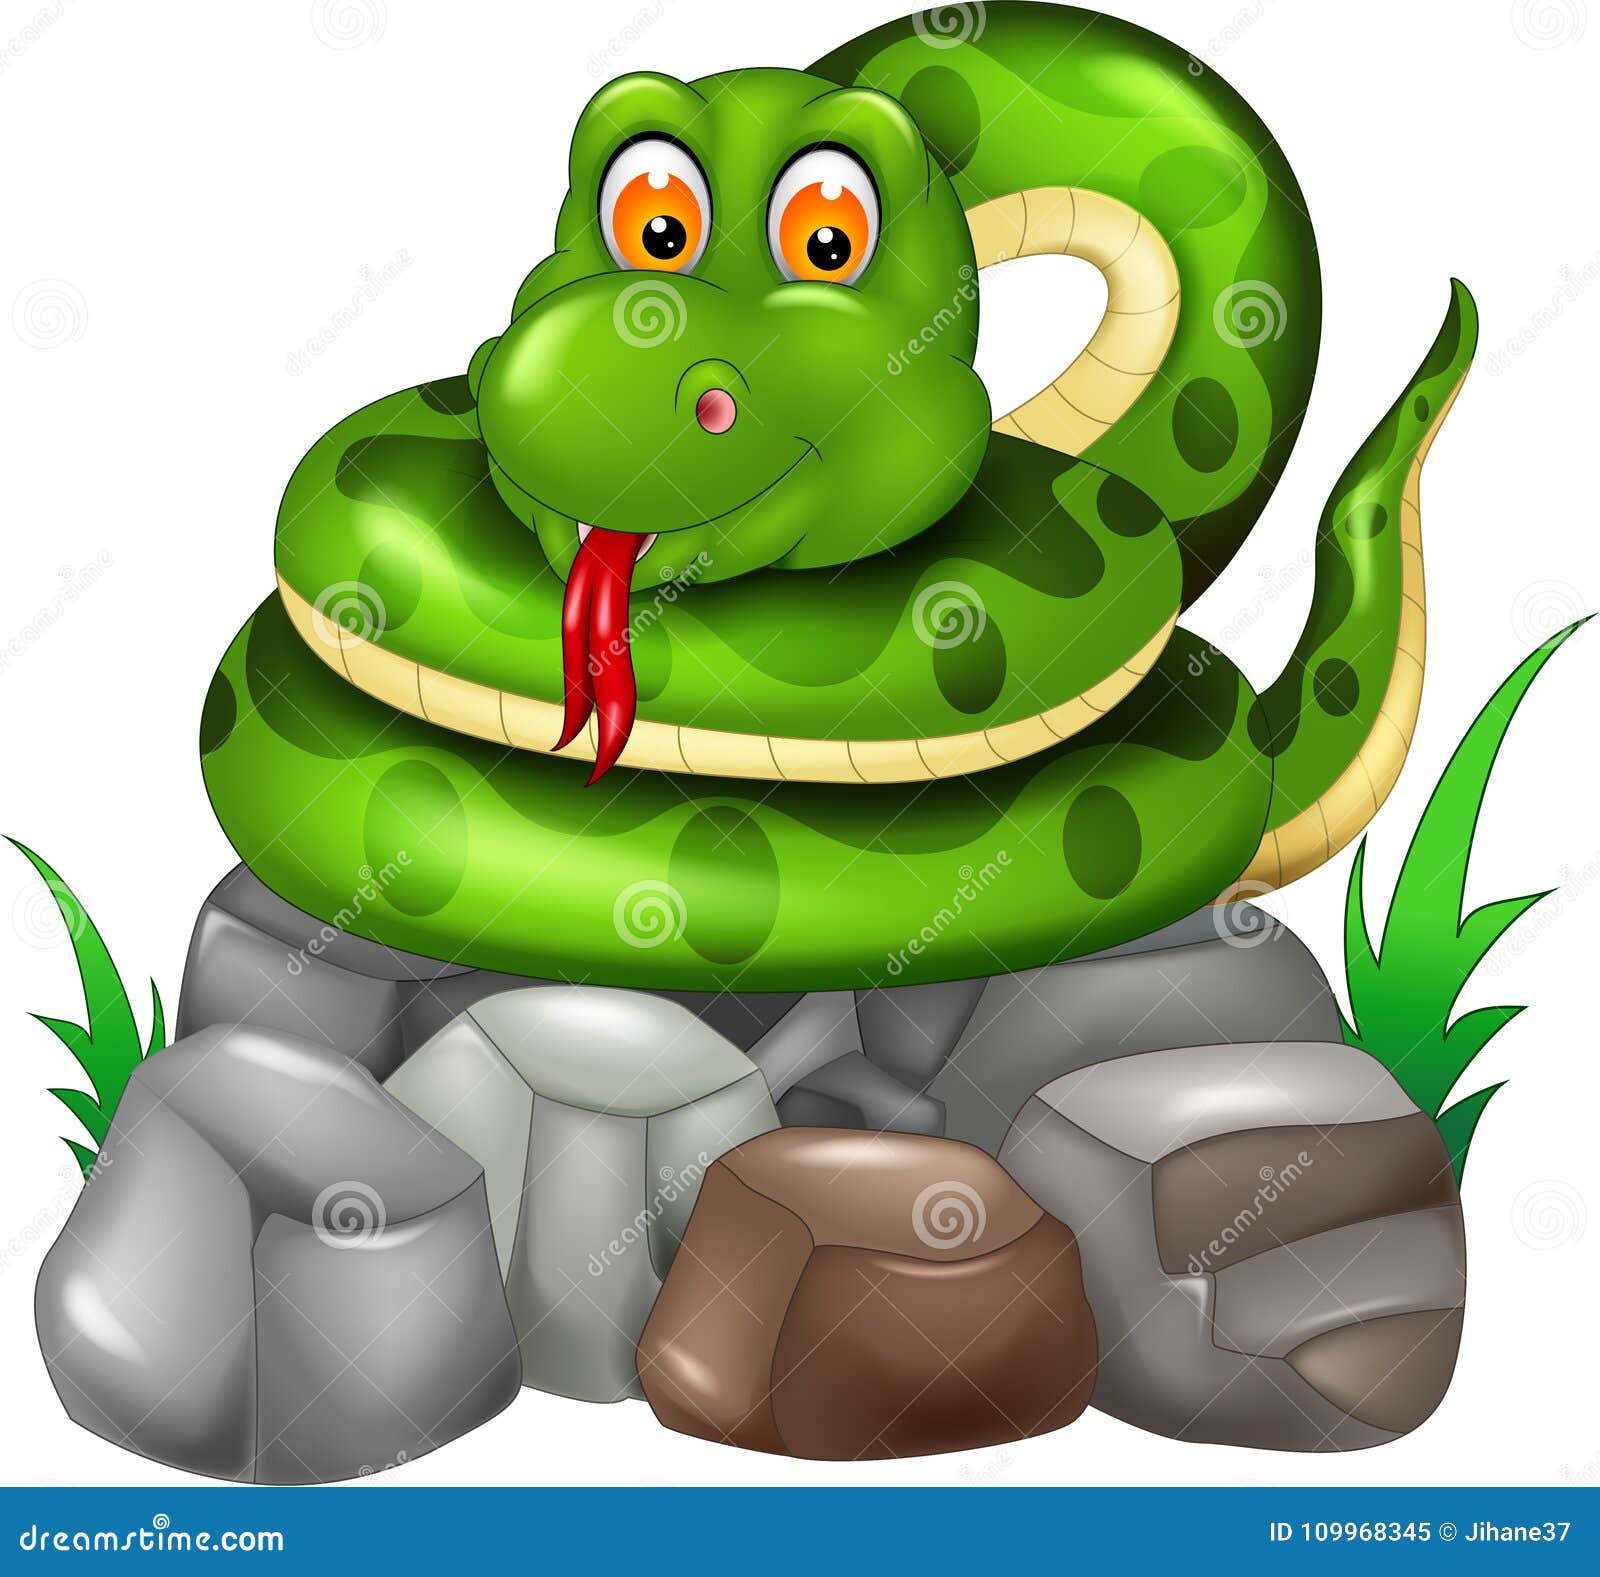 Funny Snake Cartoon Posing on Stone with Smile and Sticking Her Tongue Out  Stock Illustration - Illustration of fright, aggression: 109968345